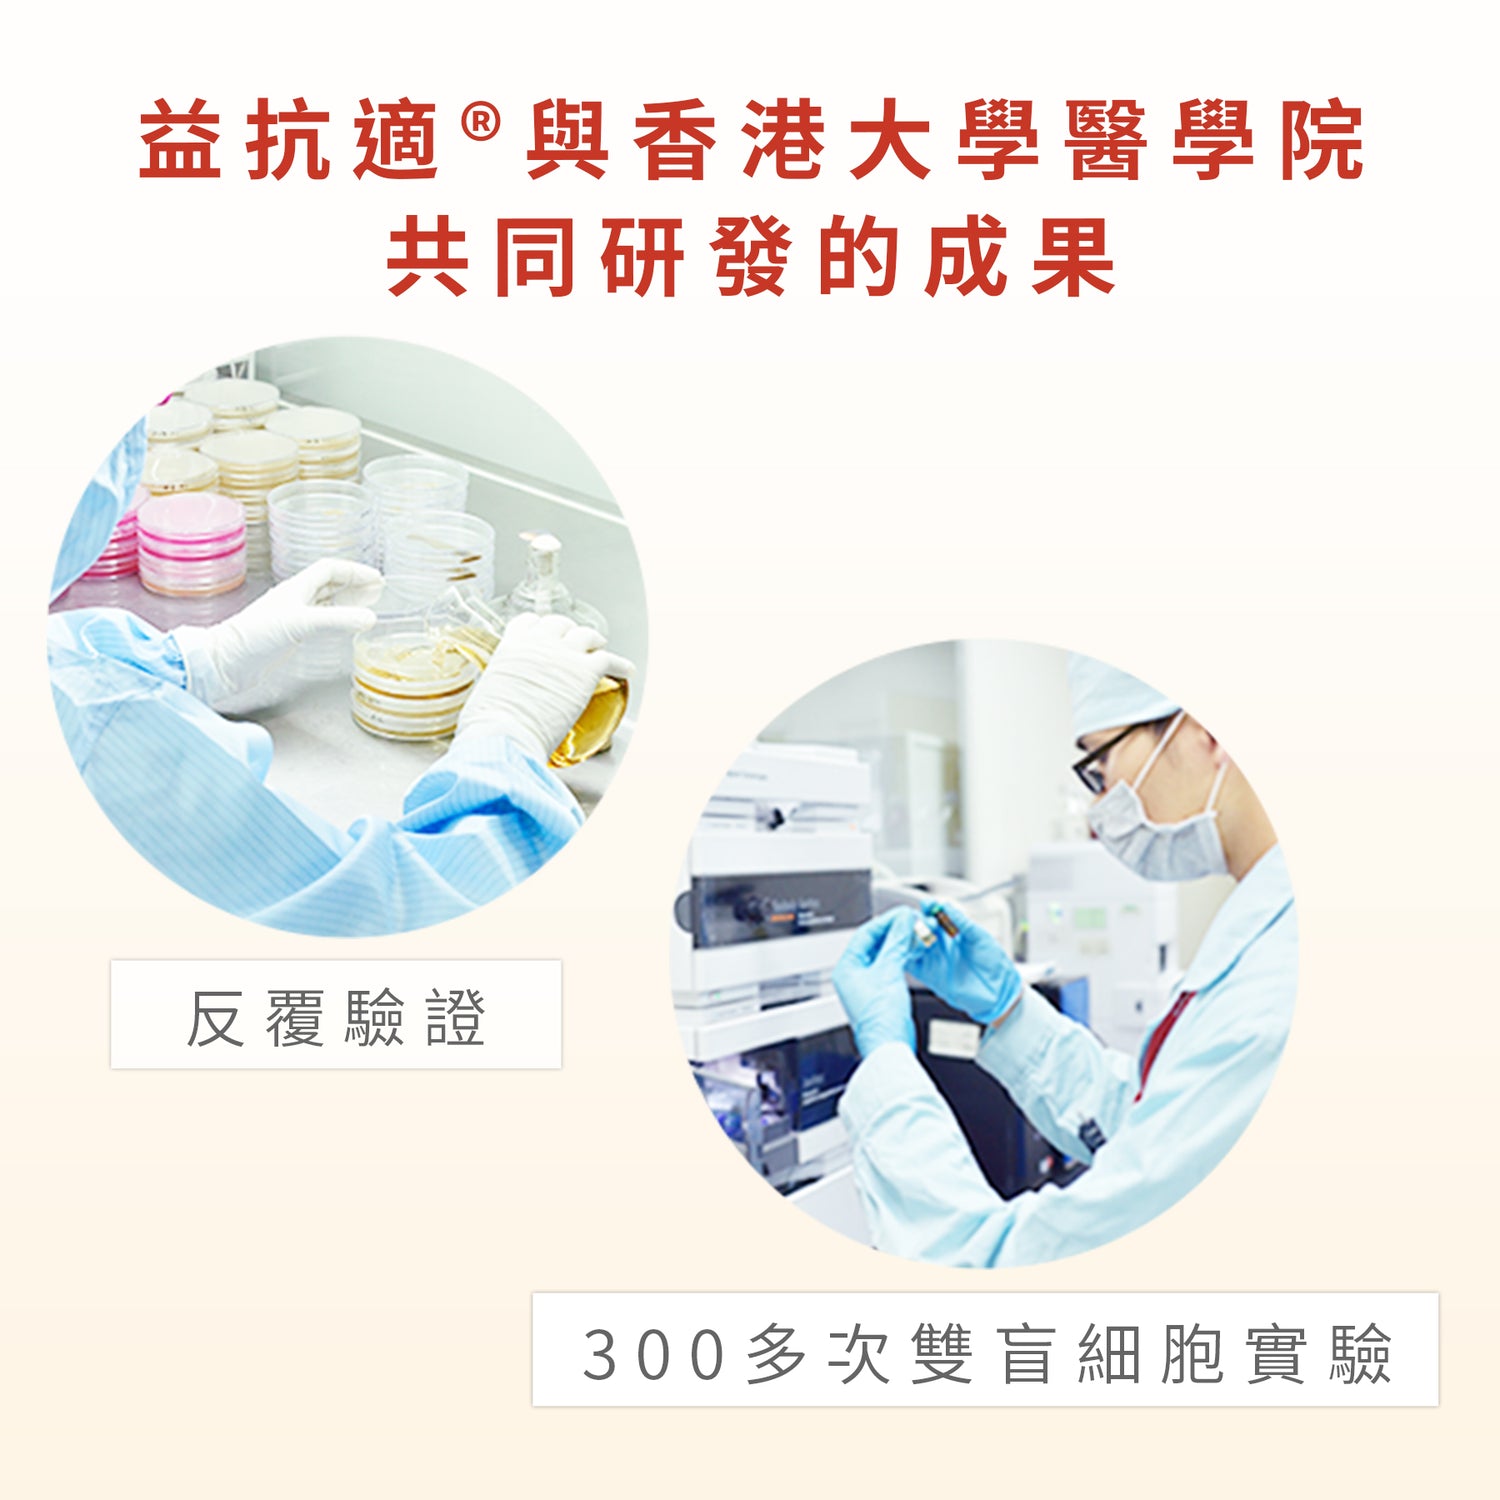 Technological Advancement in Chinese Medicine